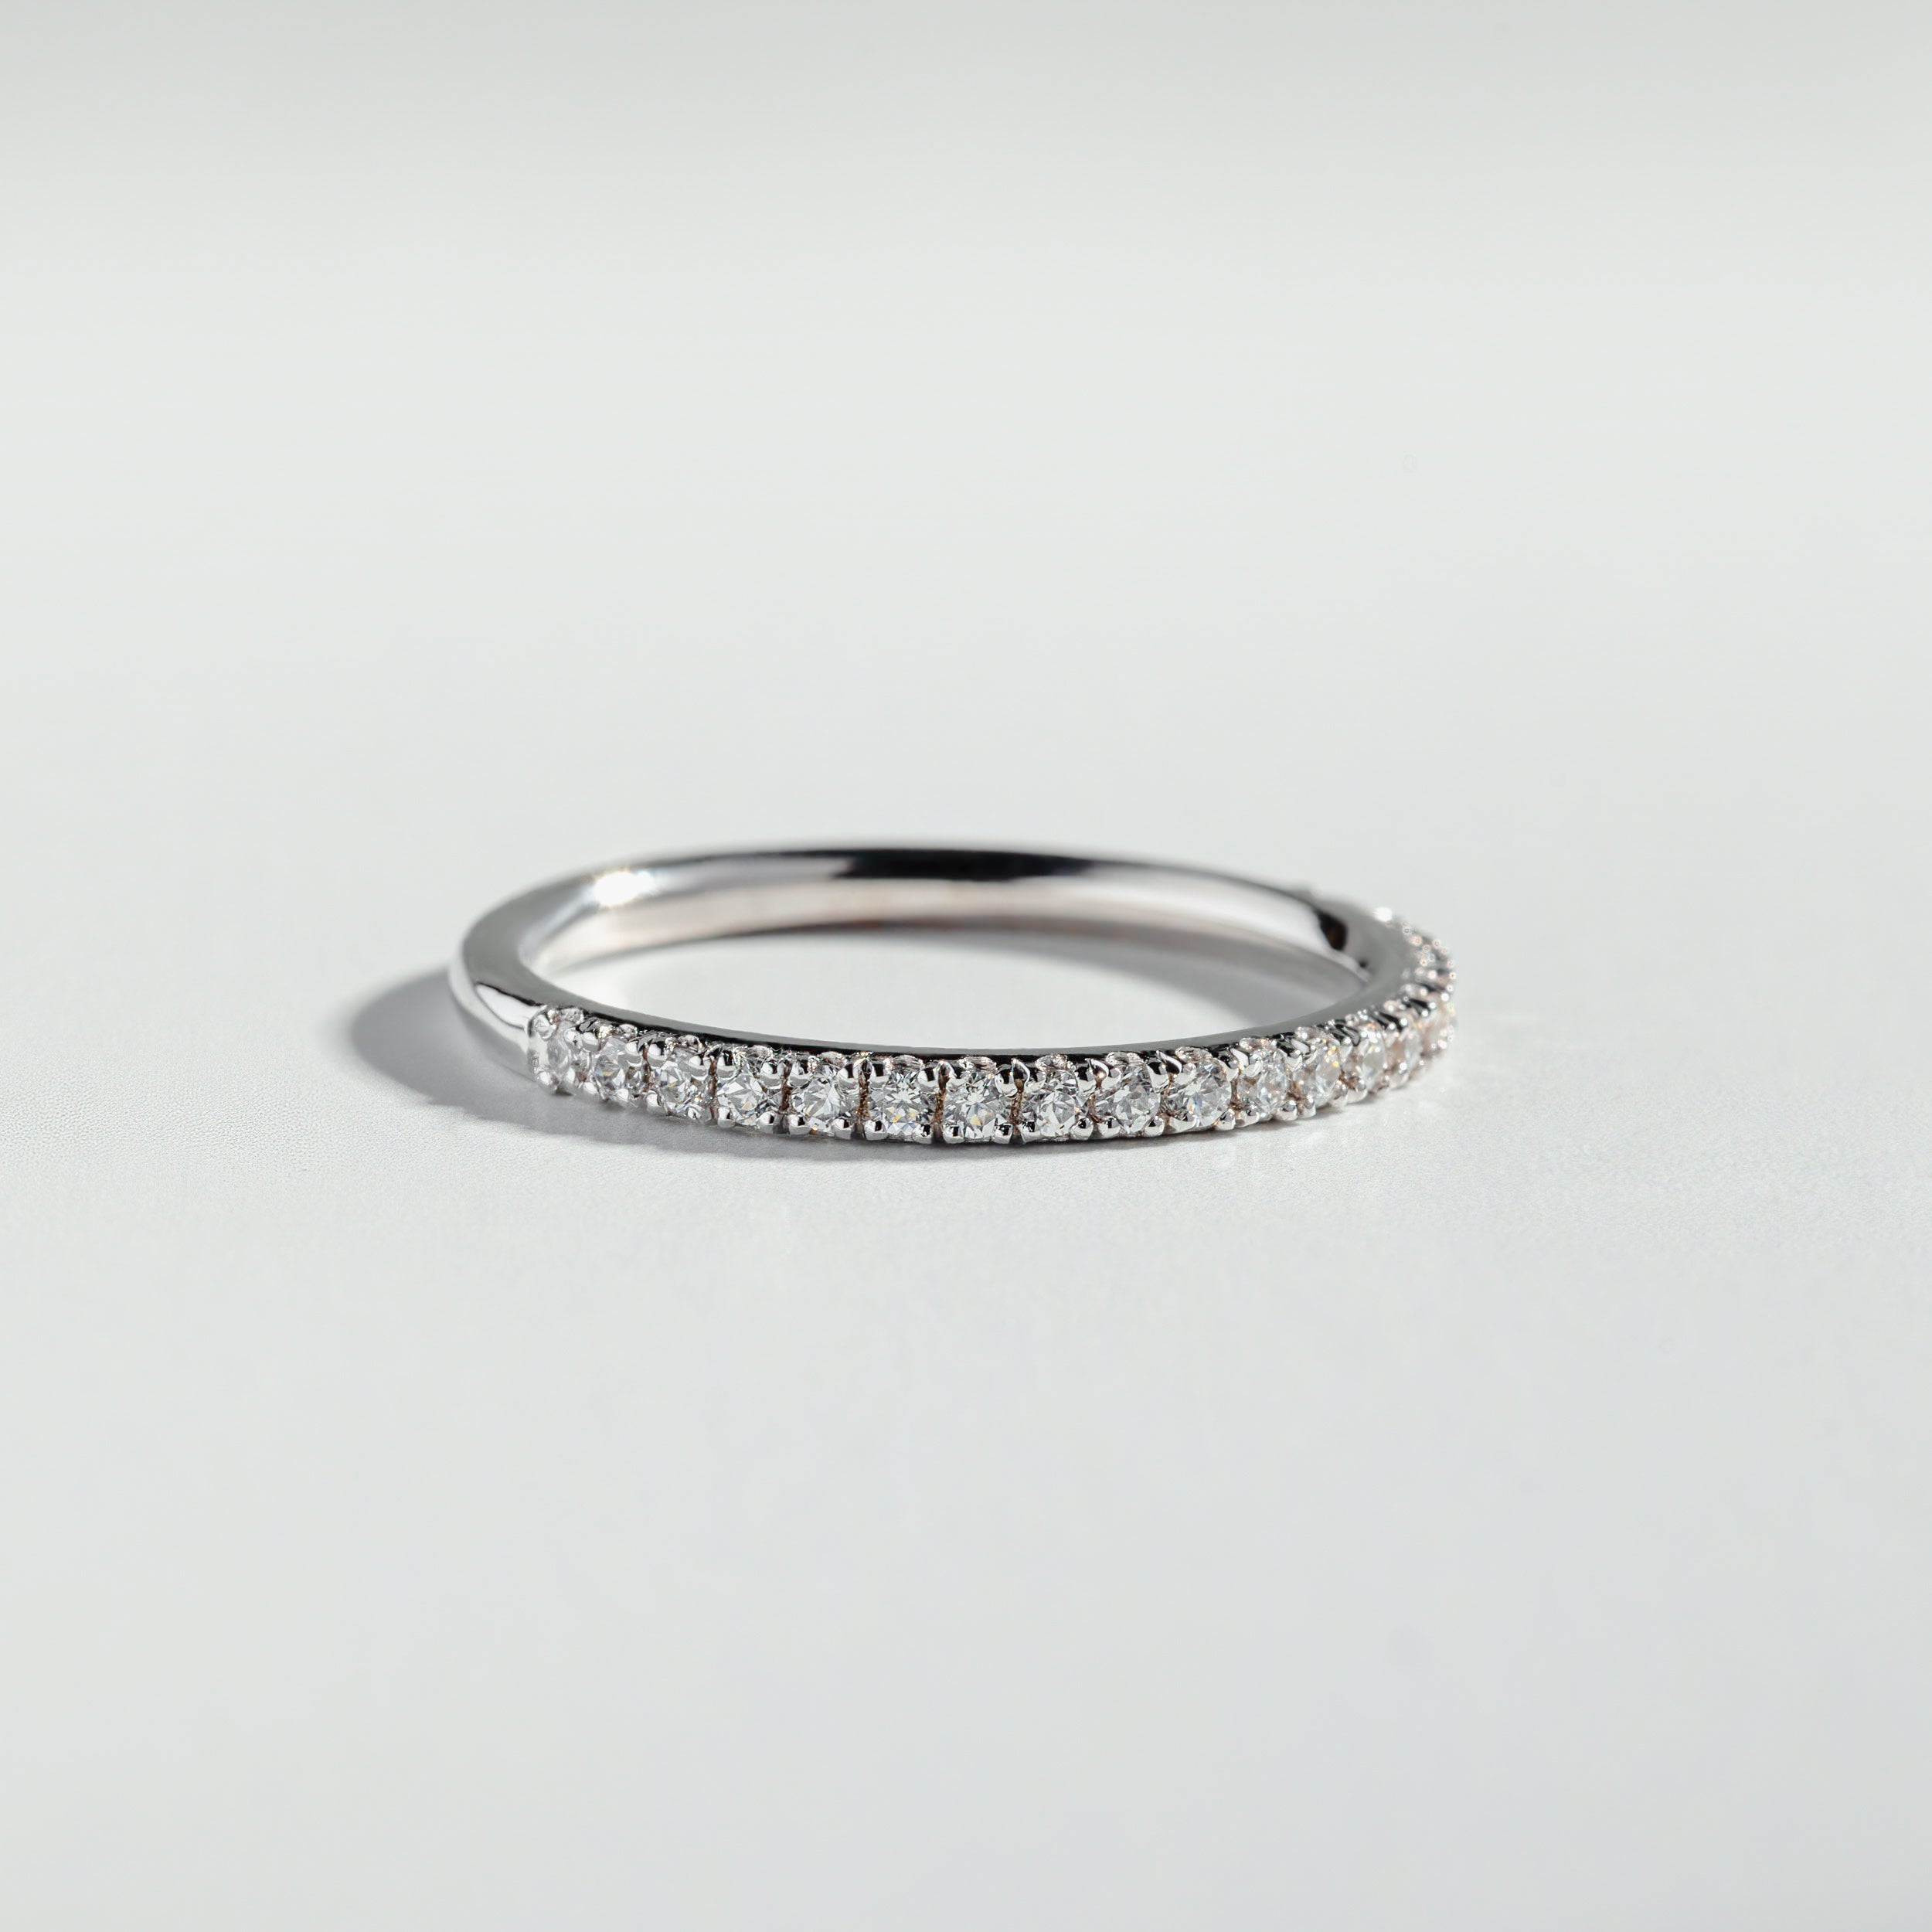  The Diamond Pavé Ring | Atelier RMR Montreal | Engagement Ring